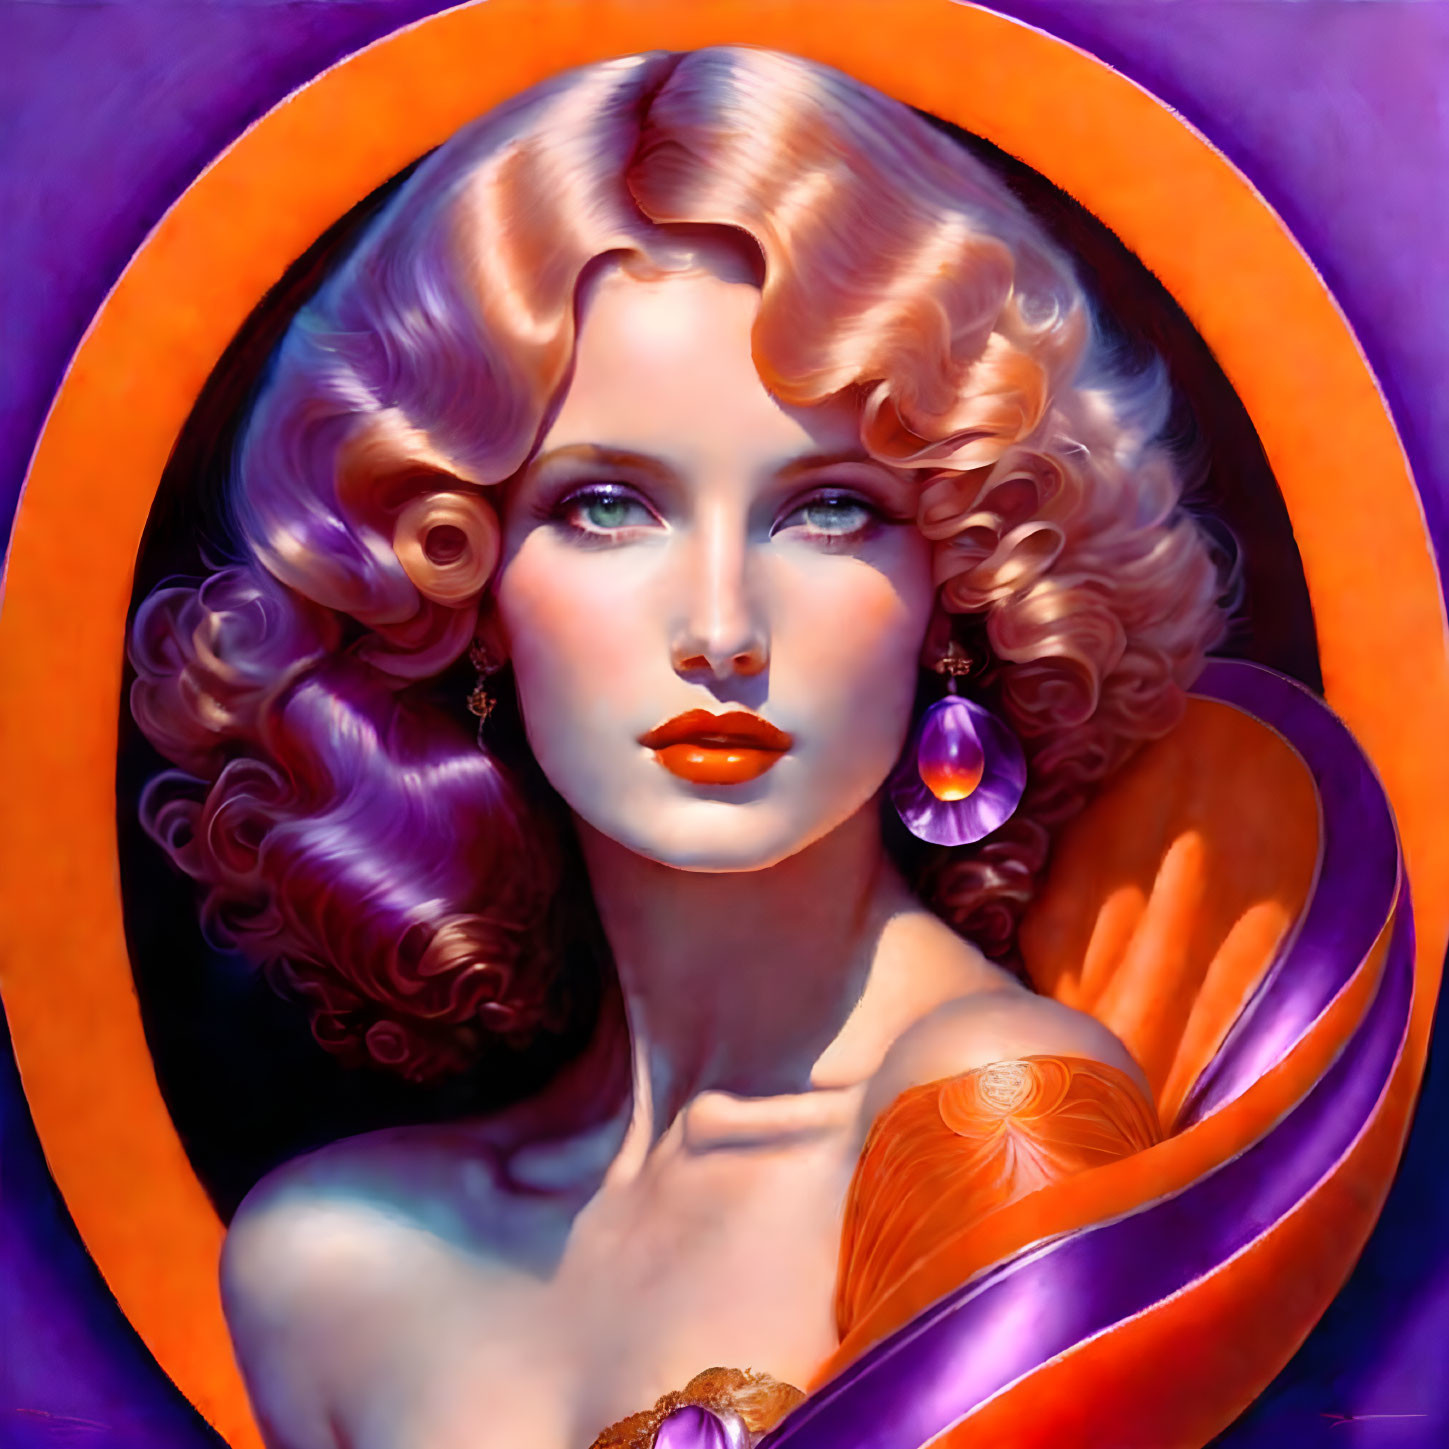 Colorful portrait of a woman with golden curls and blue eyes on purple-orange backdrop